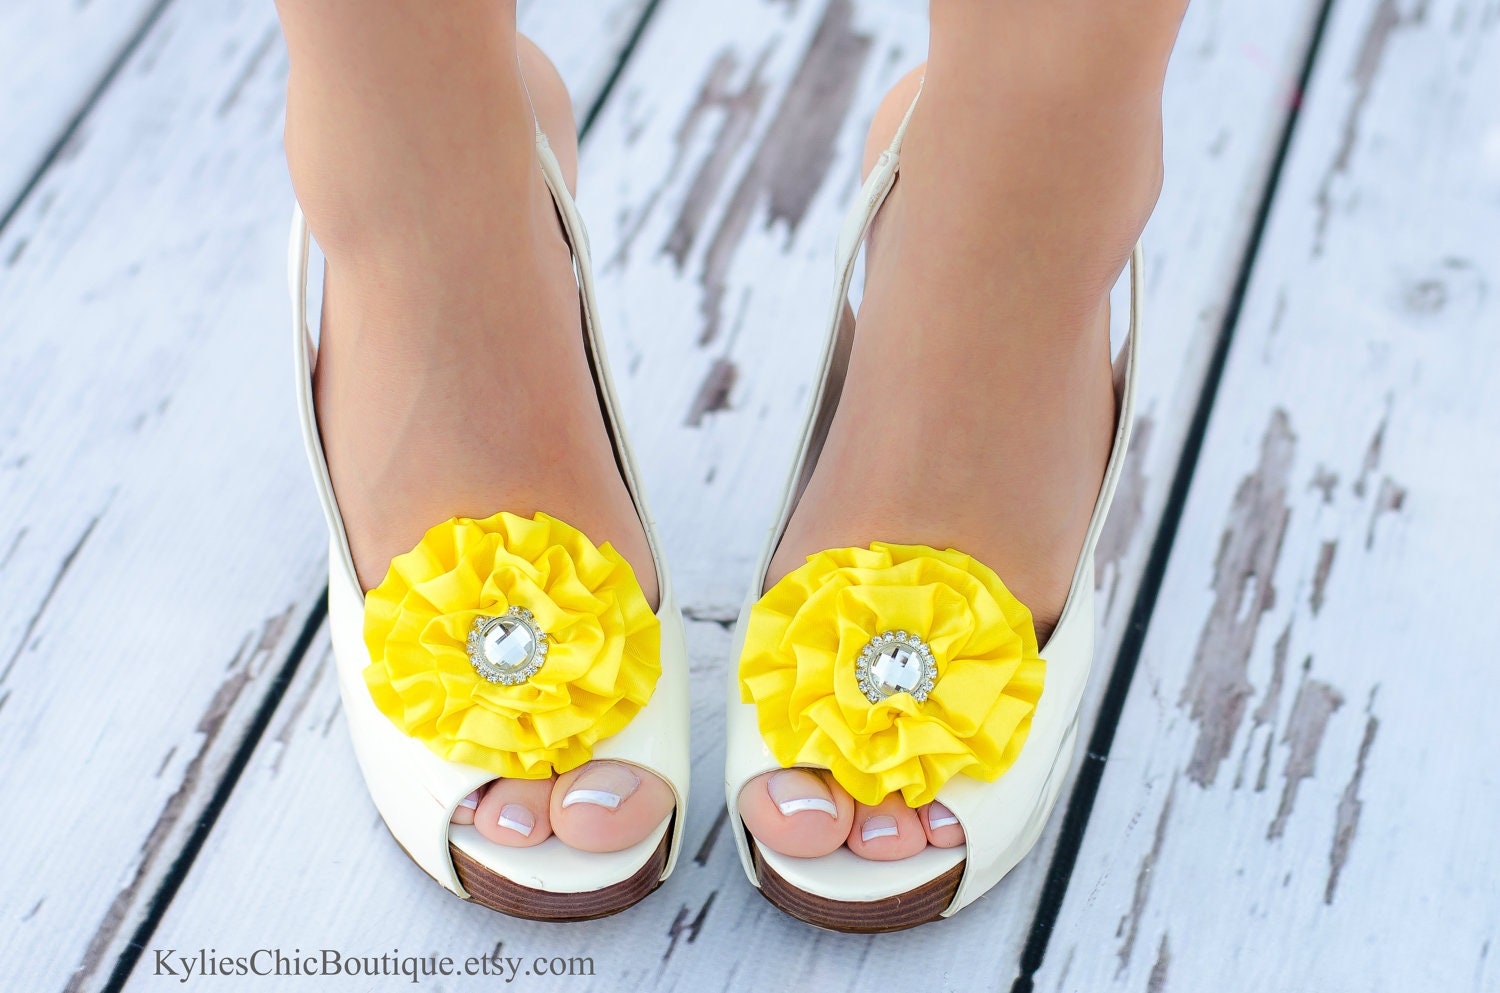 Canary Yellow Shoe Clips - Wedding, Bridesmaid, Date Night, Party, Everyday wear